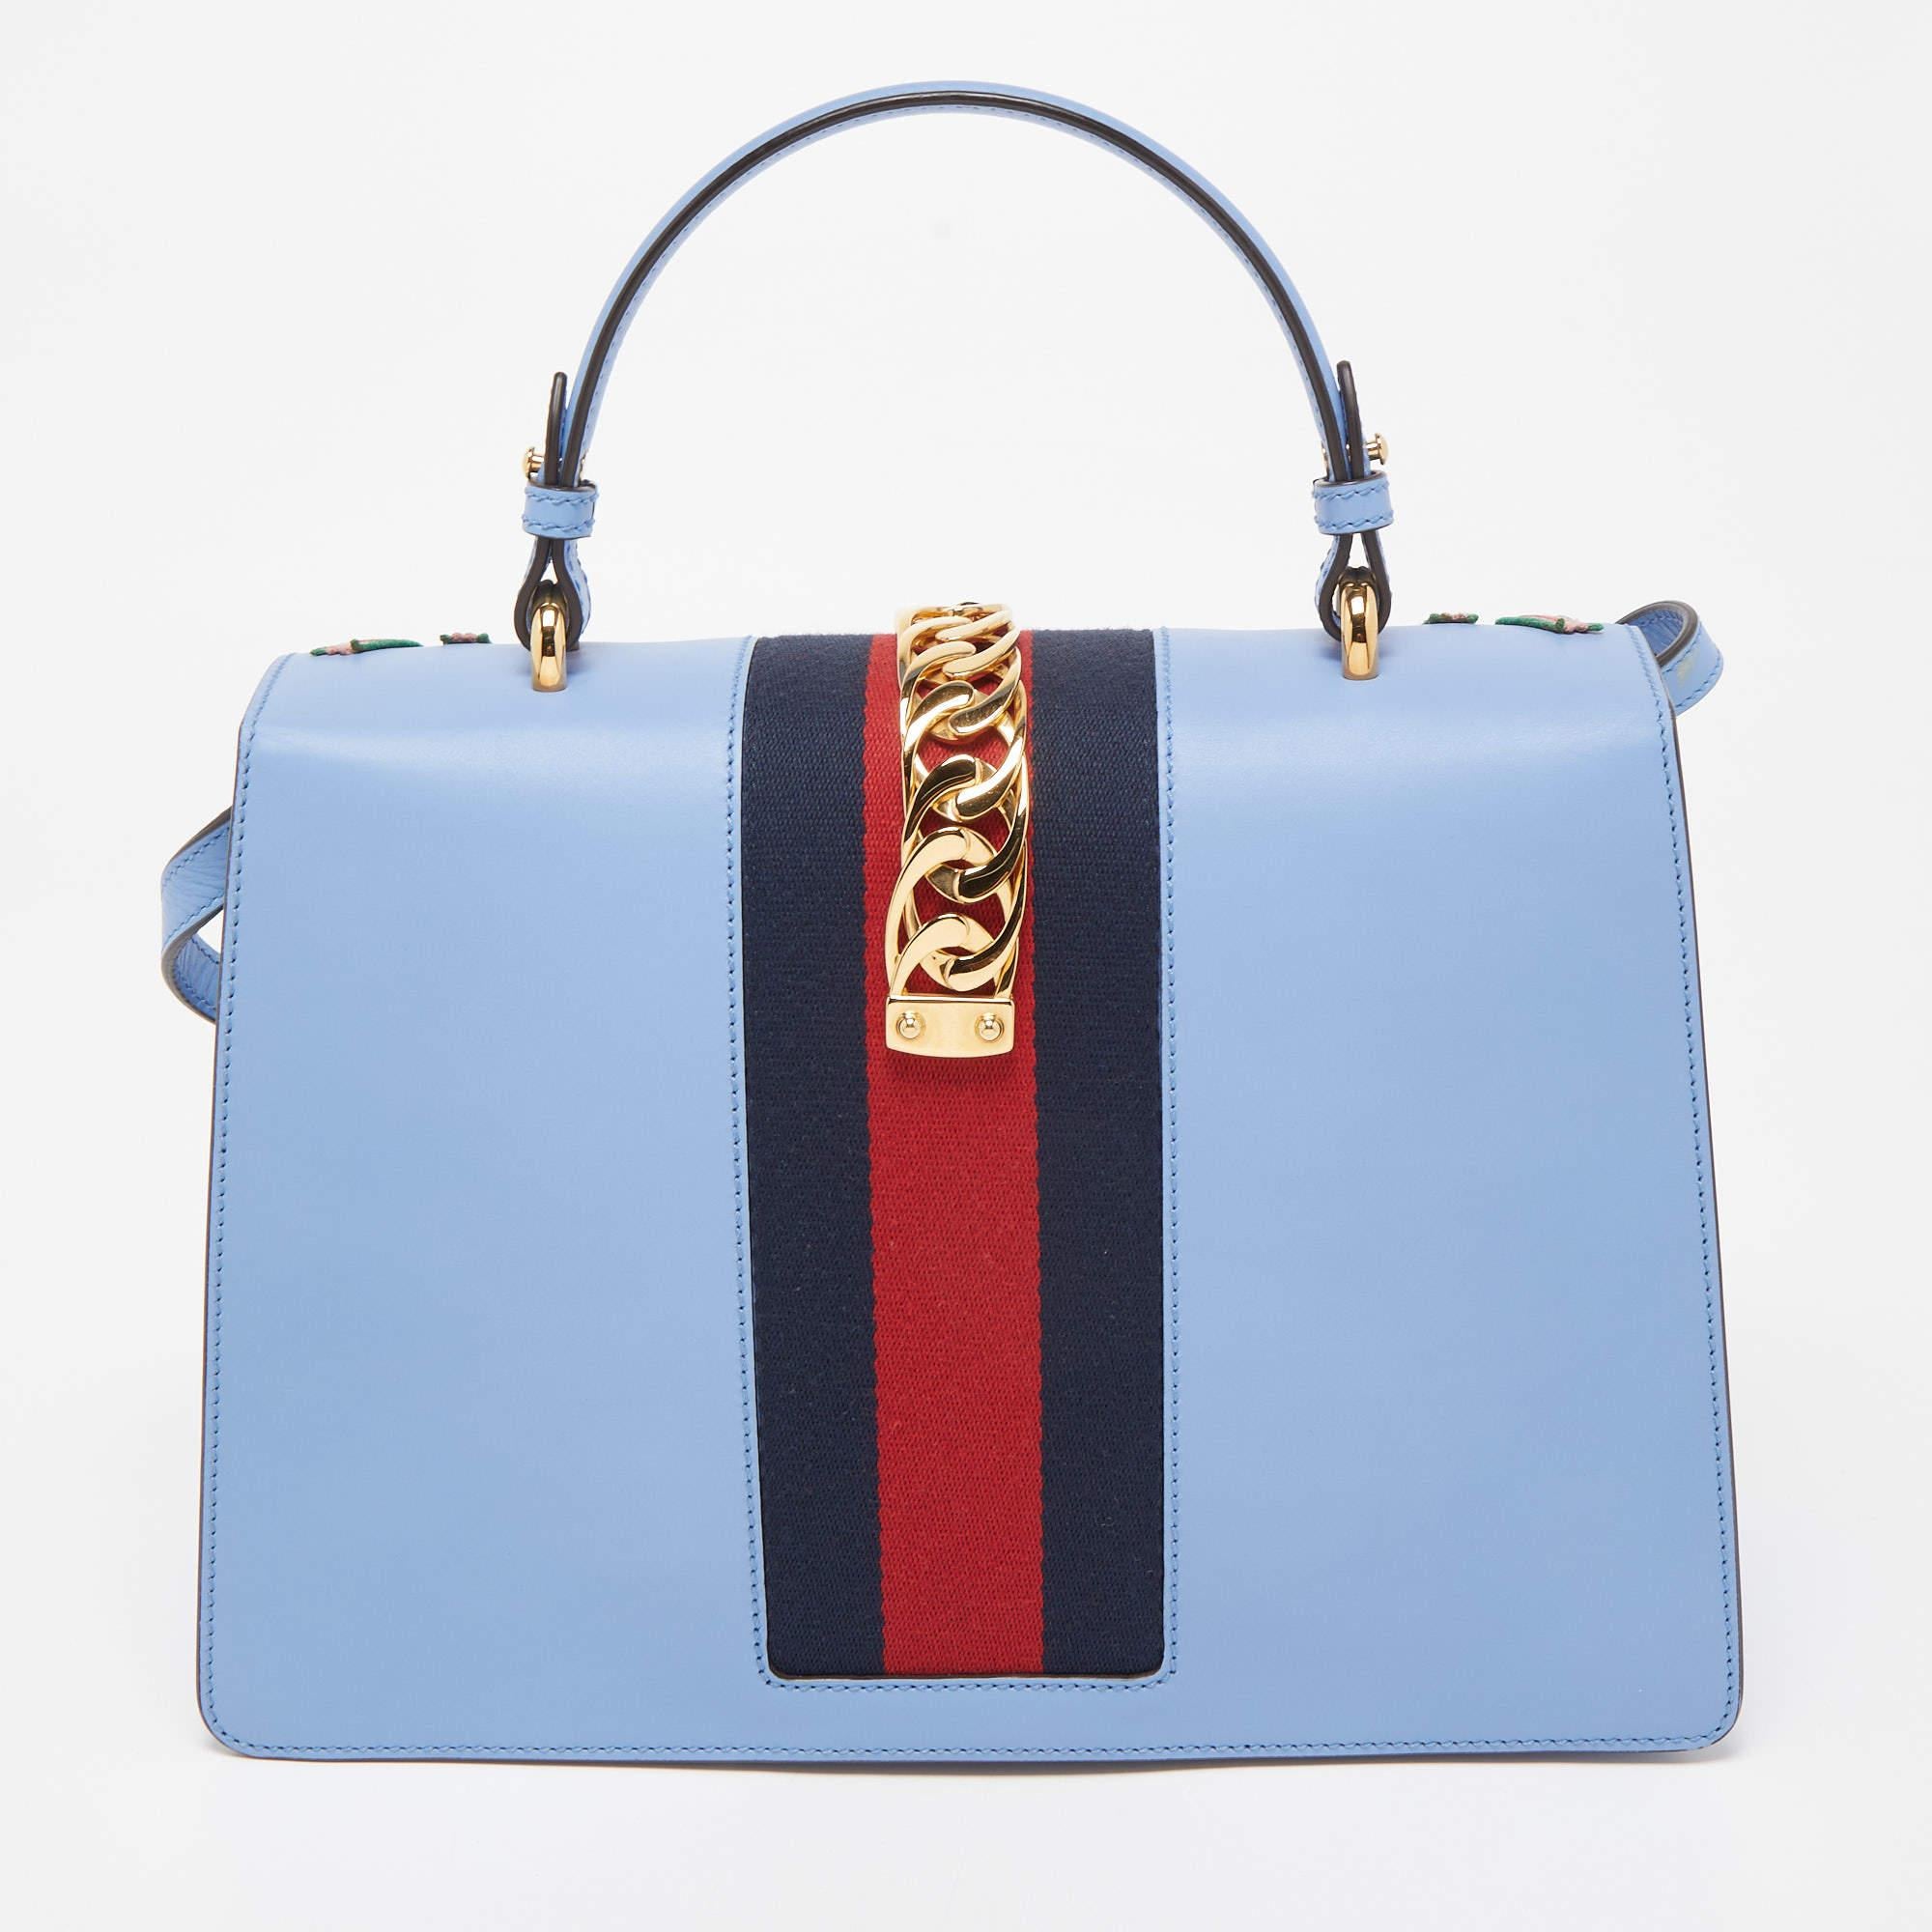 From the house of Gucci comes this gorgeous Sylvie bag that will perfectly complement all your outfits. It has been luxuriously crafted from blue leather and styled with floral embroidery on the front, a chain-web decorated flap, and a buckle lock